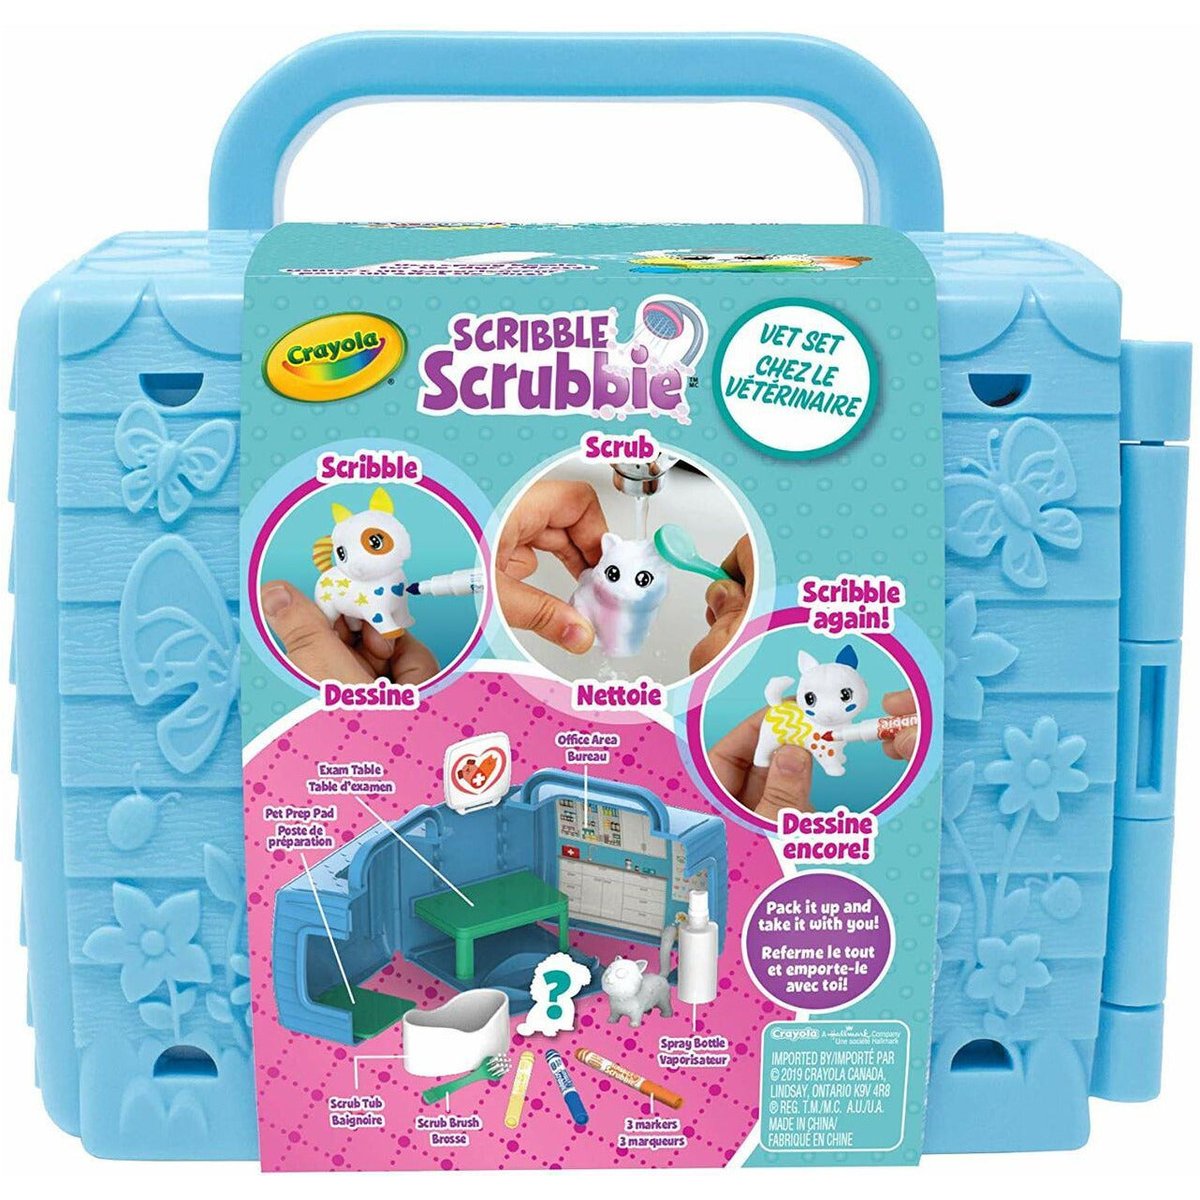 CRAYOLA Scribble SCRUBBIE Pets Vet Toy Set Washable Markers Pets Brand New